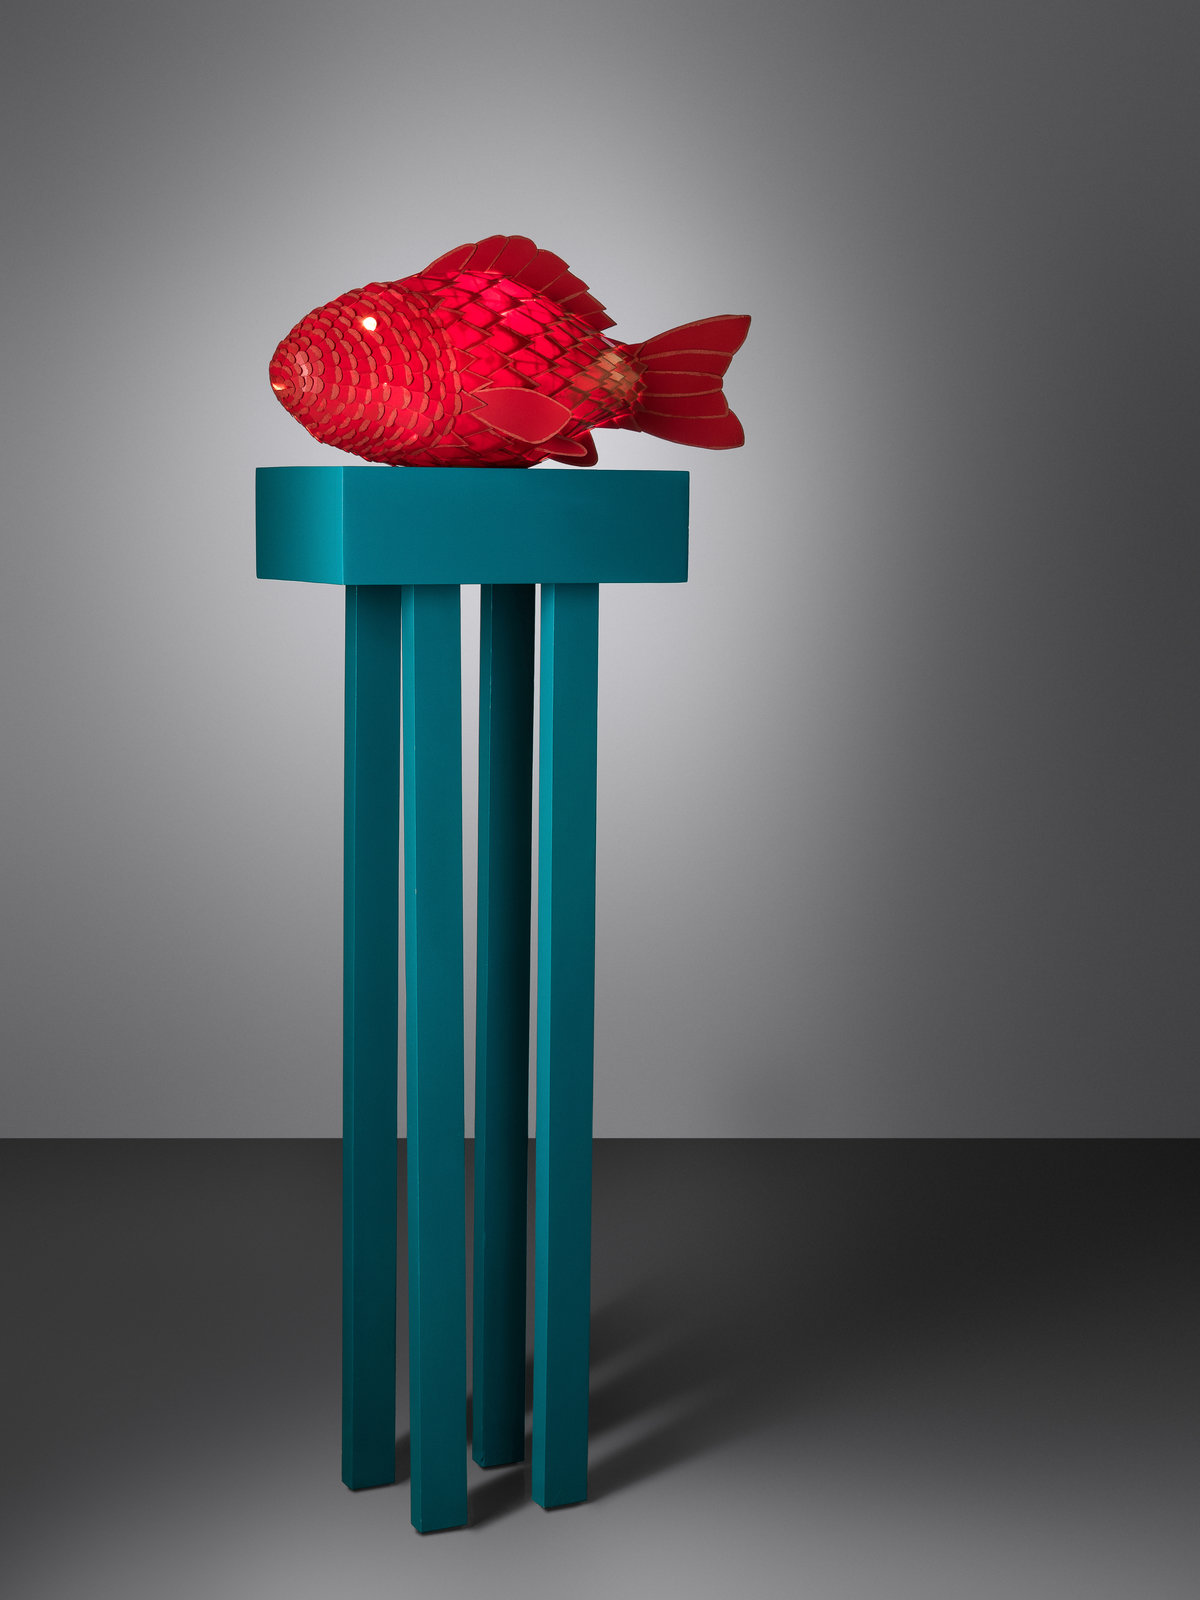 Fish Lamp, c. 1985 Produced by New City Editions, Venice, CA